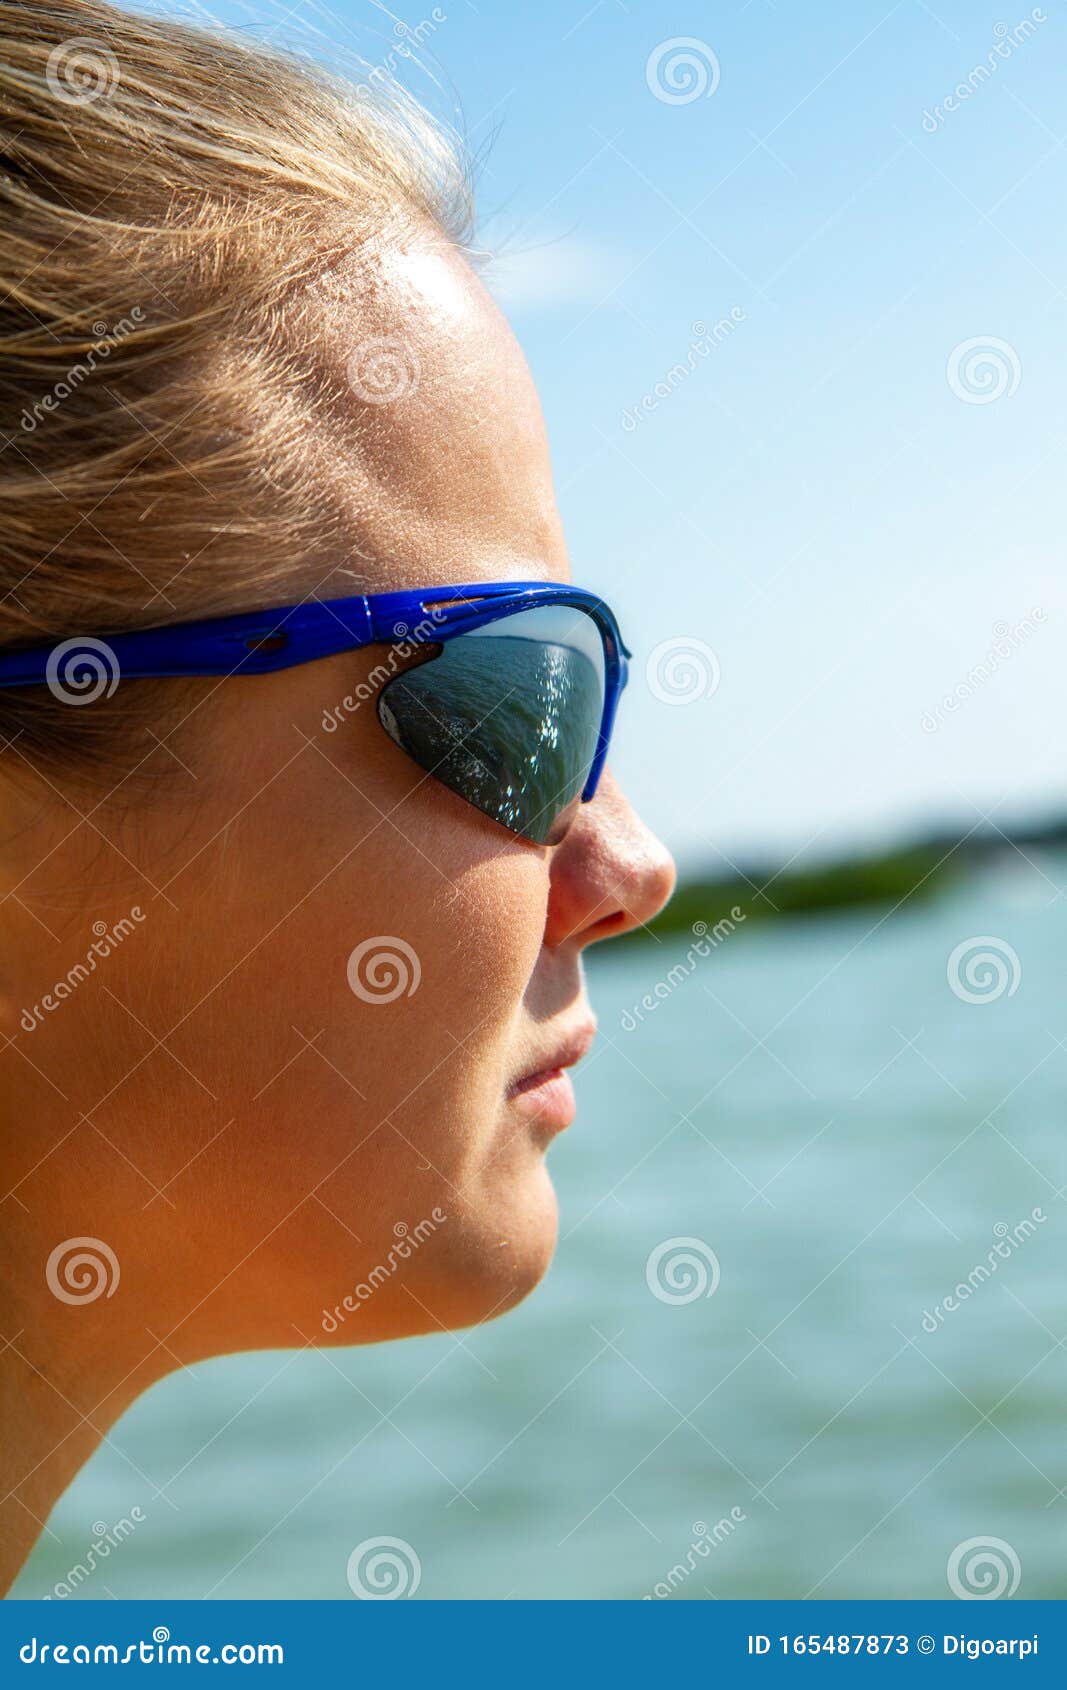 Pretty Girl With Sunglasses In Summertime In A Sunny Day Stock Image Image Of Joyful Modern